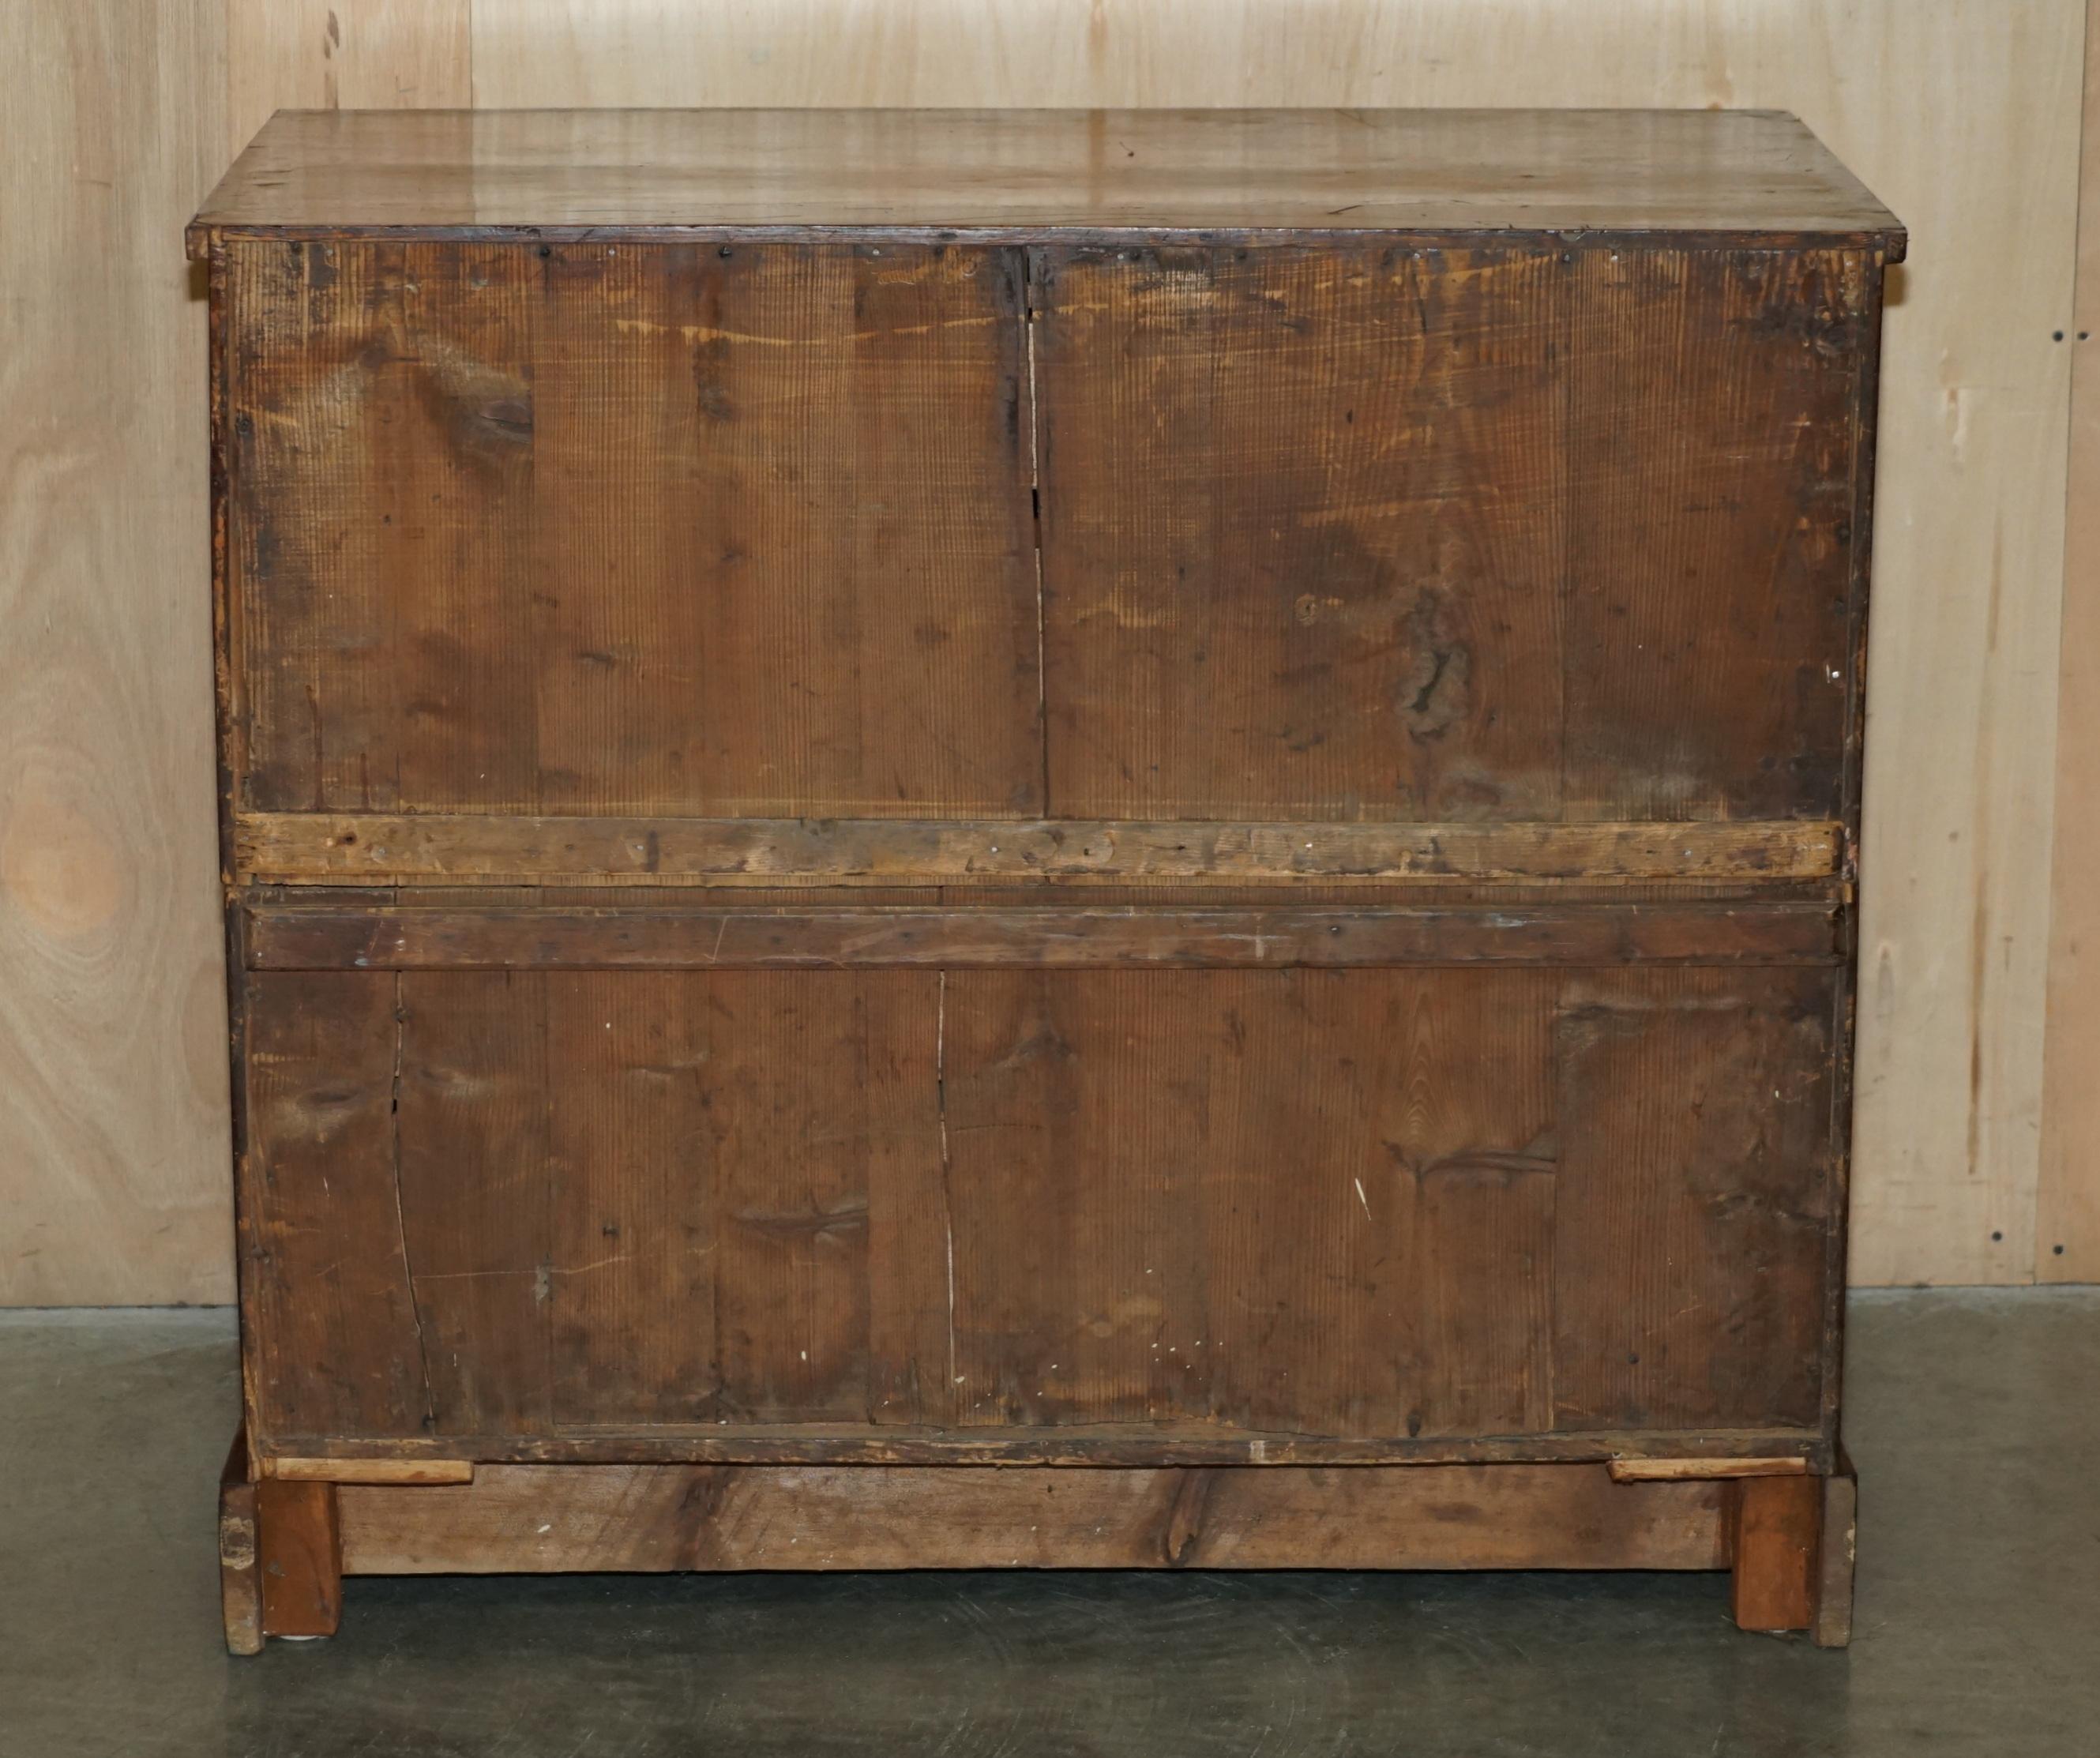 ANTiQUE GEORGE III BACHELORS CHEST OF DRAWERS ATTRIBUTED TO GILLOWS OF LANCASTER im Angebot 5